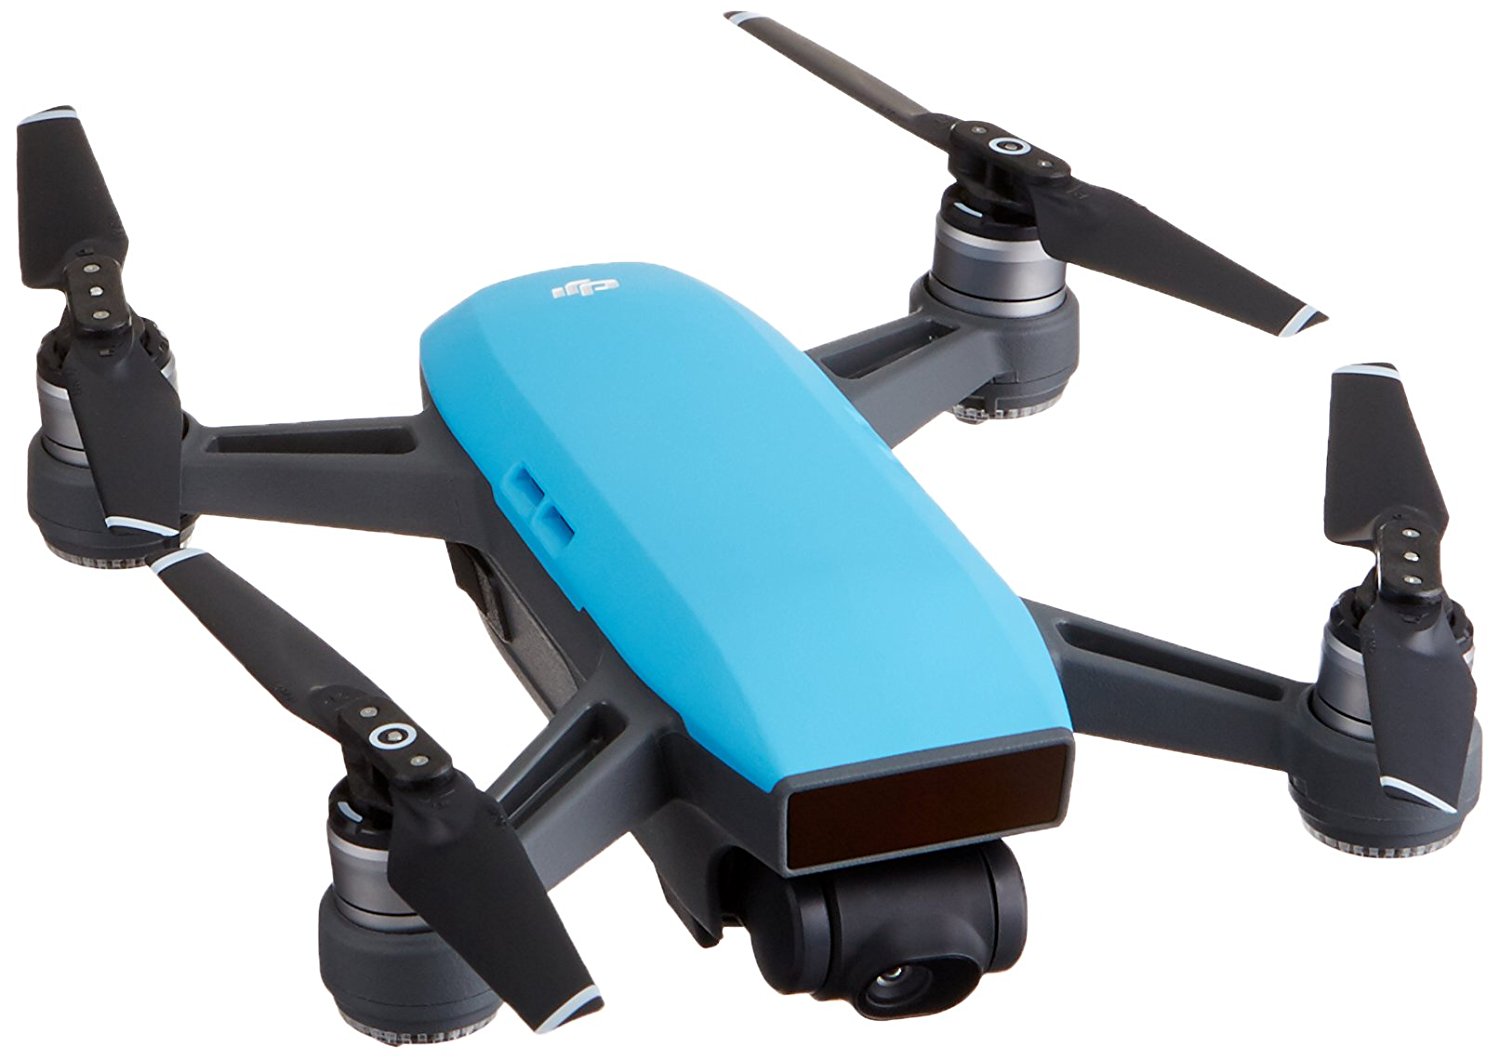 top rated drones under $300